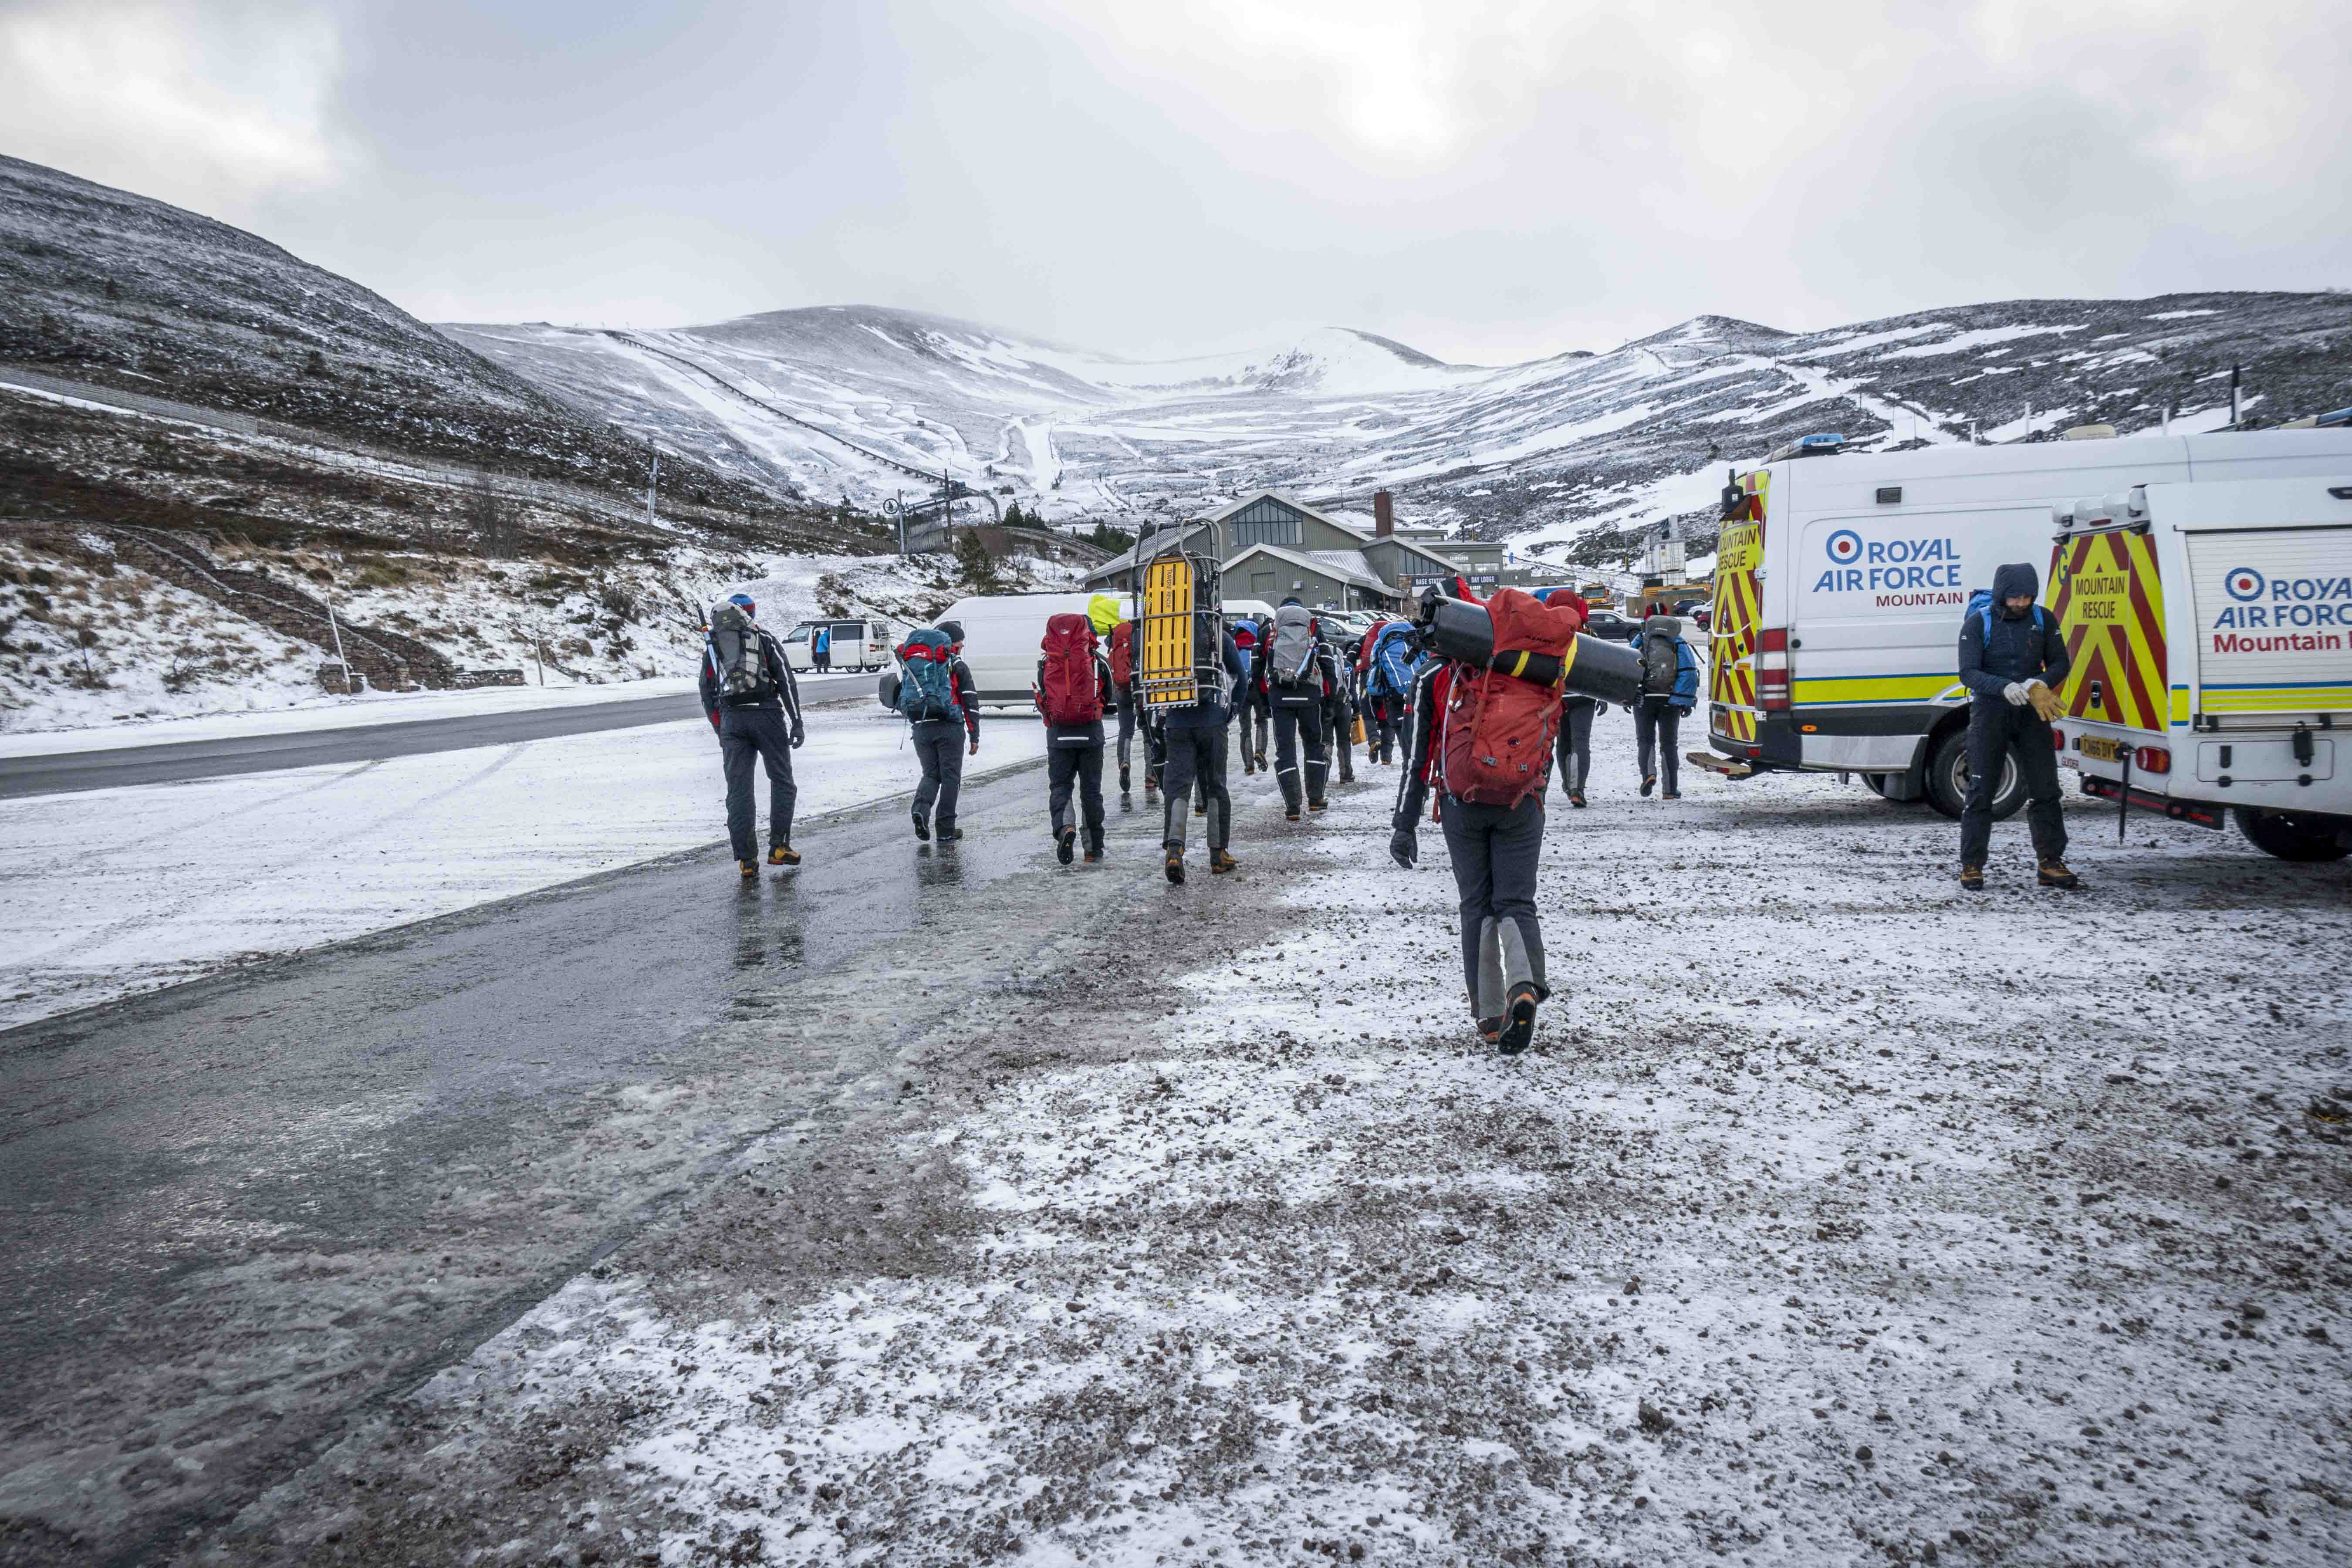 Image shows Mountain Rescue Team walking on a flat area between snowy mountains and vehicles.